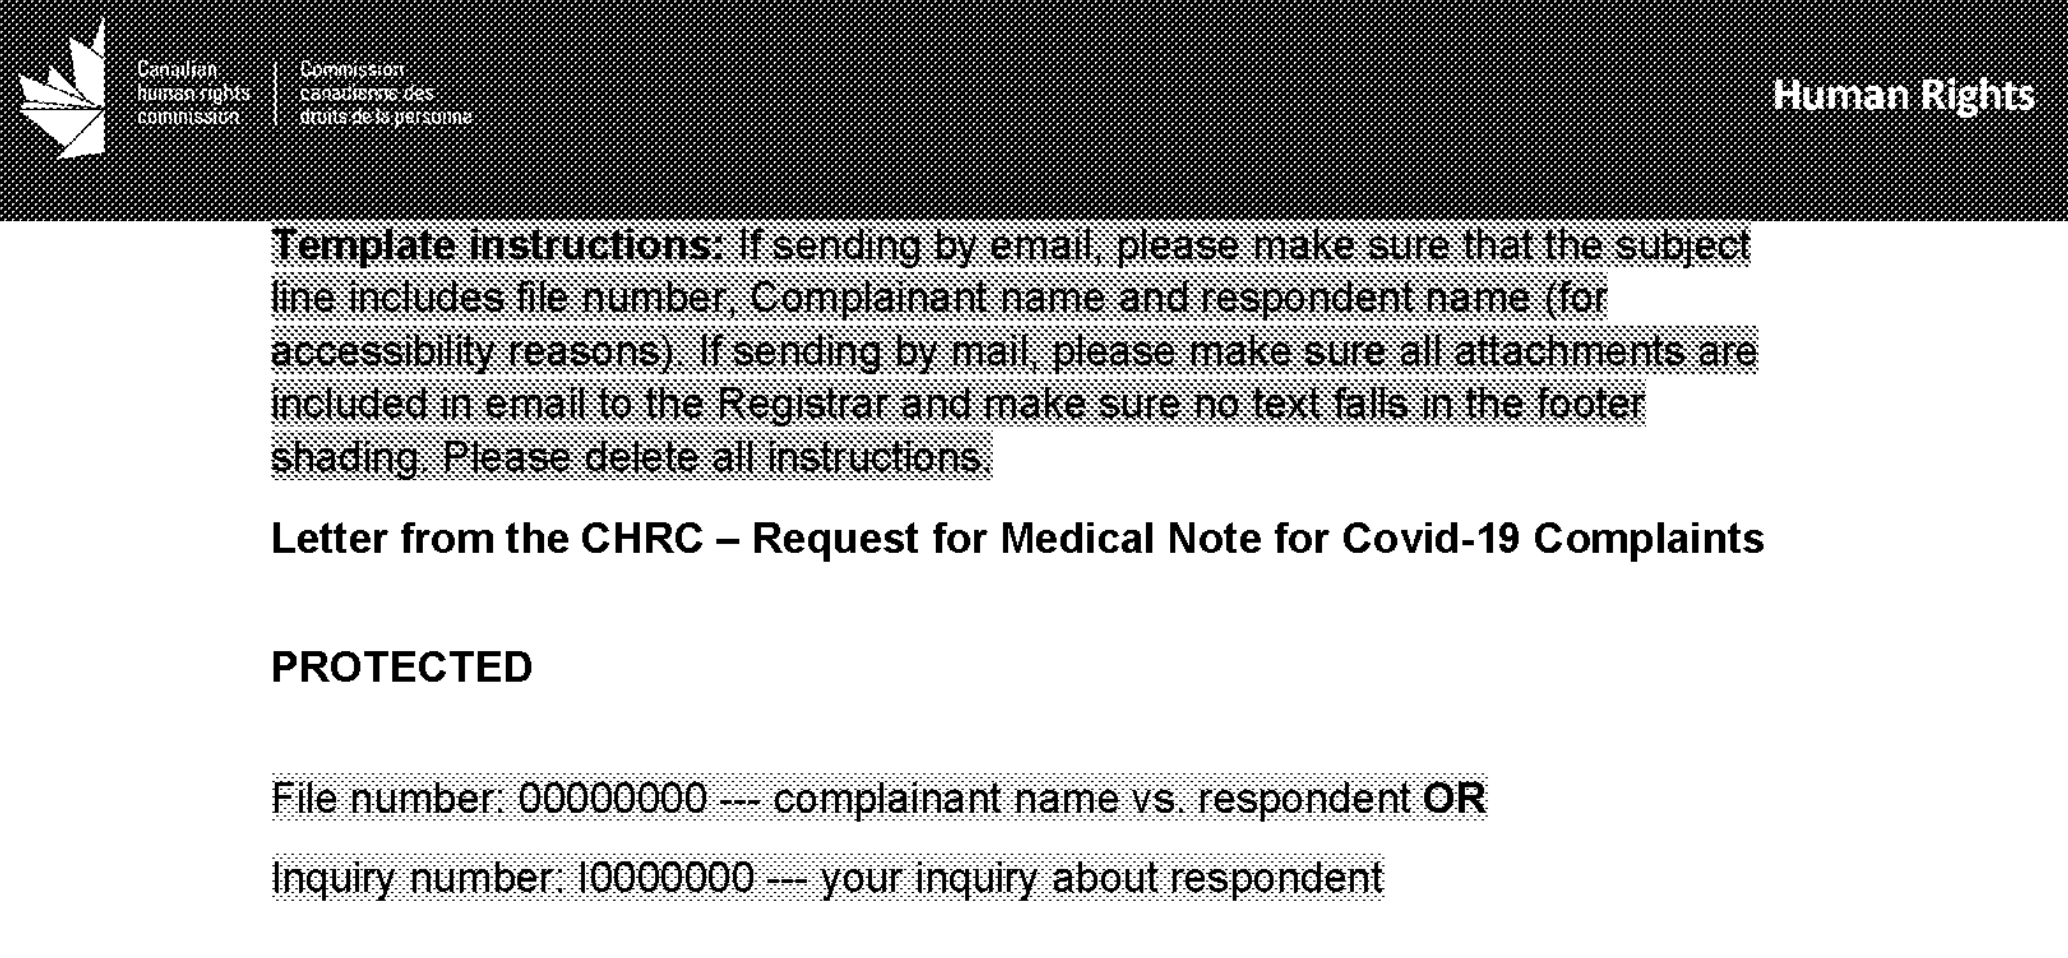 Canadian Human Rights Commission Discloses COVID-19 Complaint Records